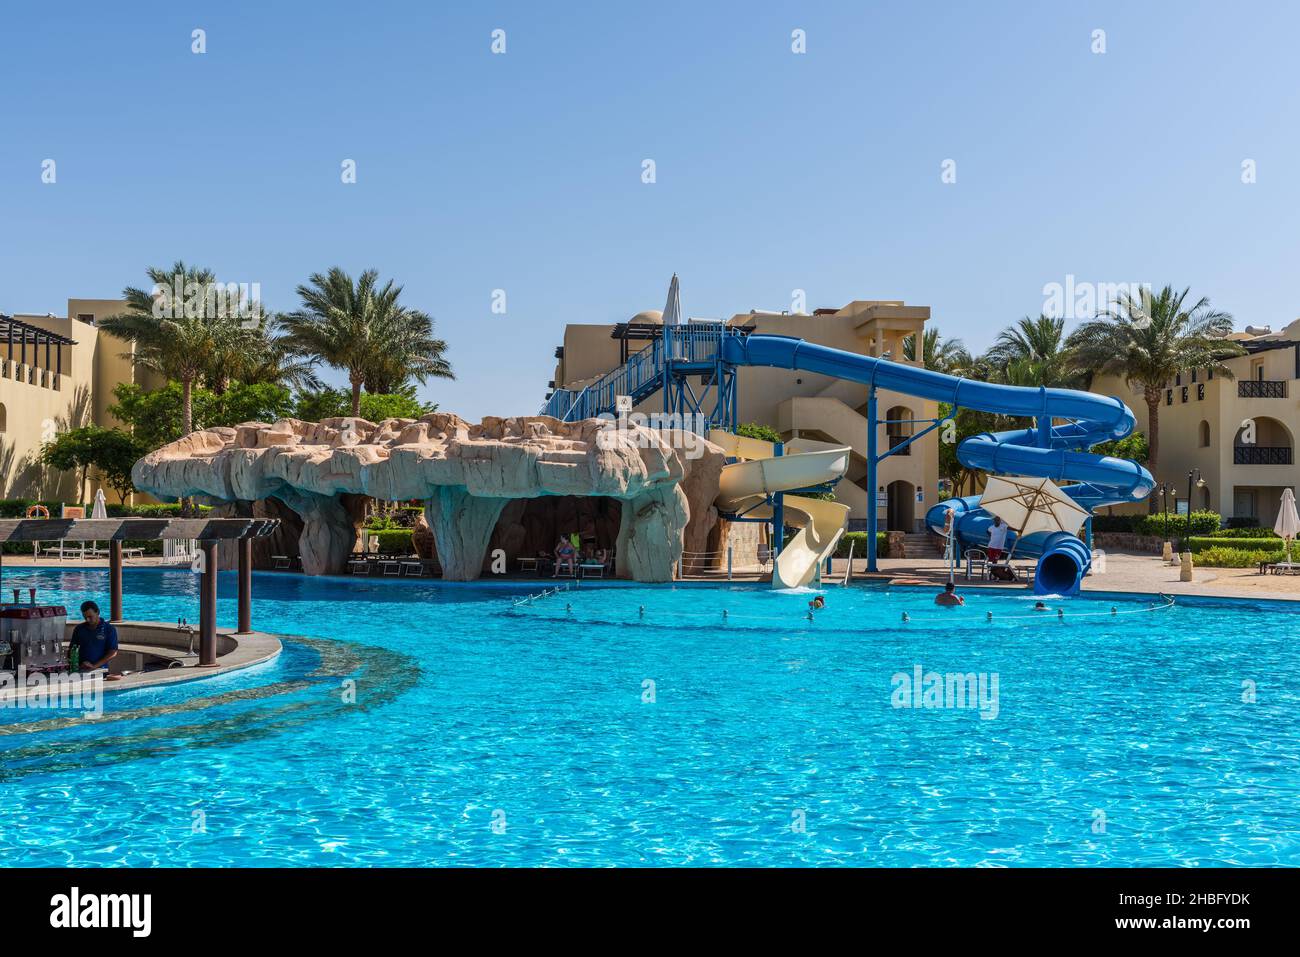 Hurghada, Egypt - May 28, 2021: View of the swimming pool in the Stella Di Mare Gardens Resort and Spa located in Makadi Bay, which one of Egypt beaut Stock Photo